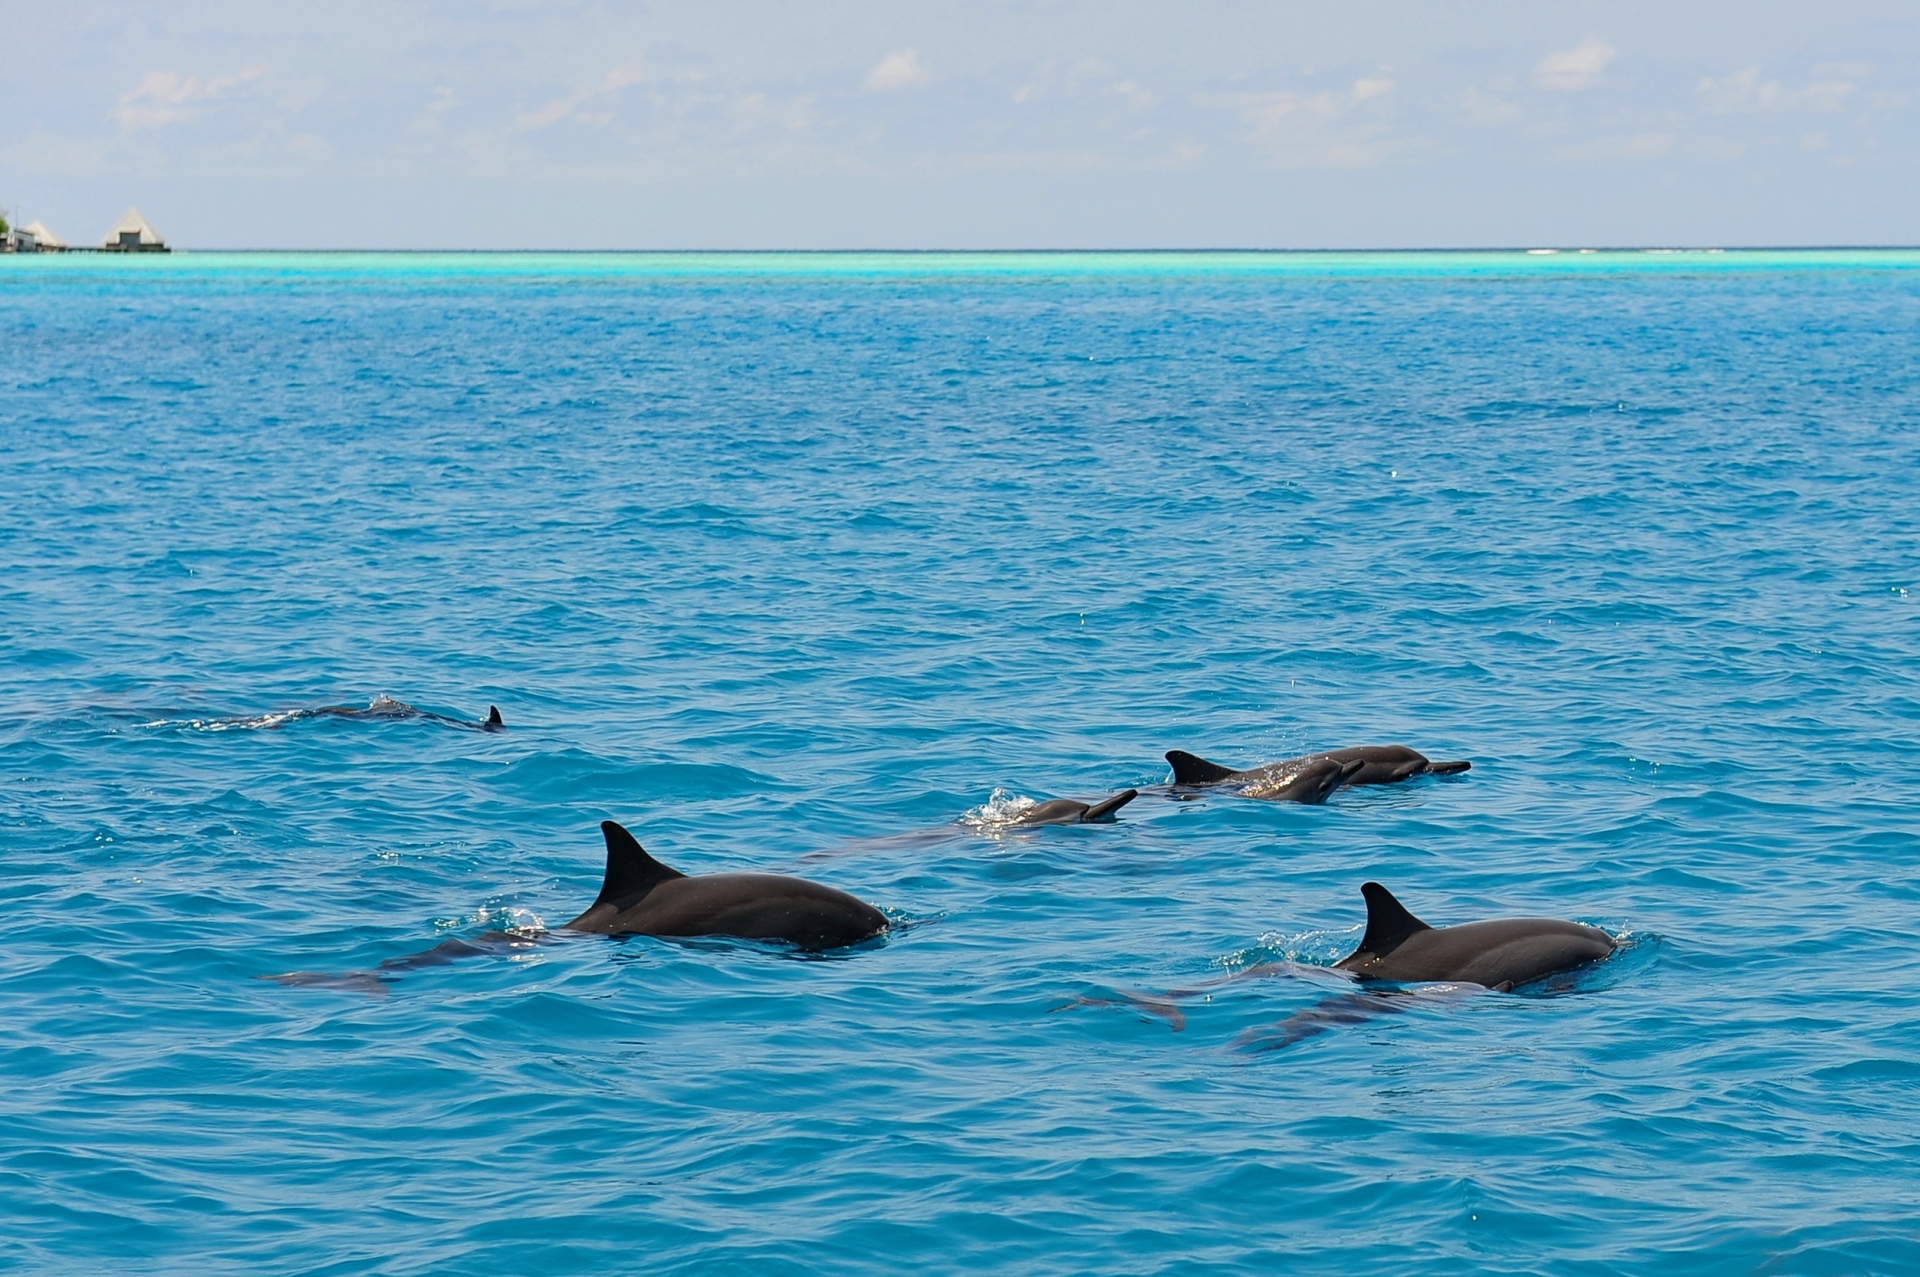 Dolphins - A Honeymoon to Oman and the Maldives